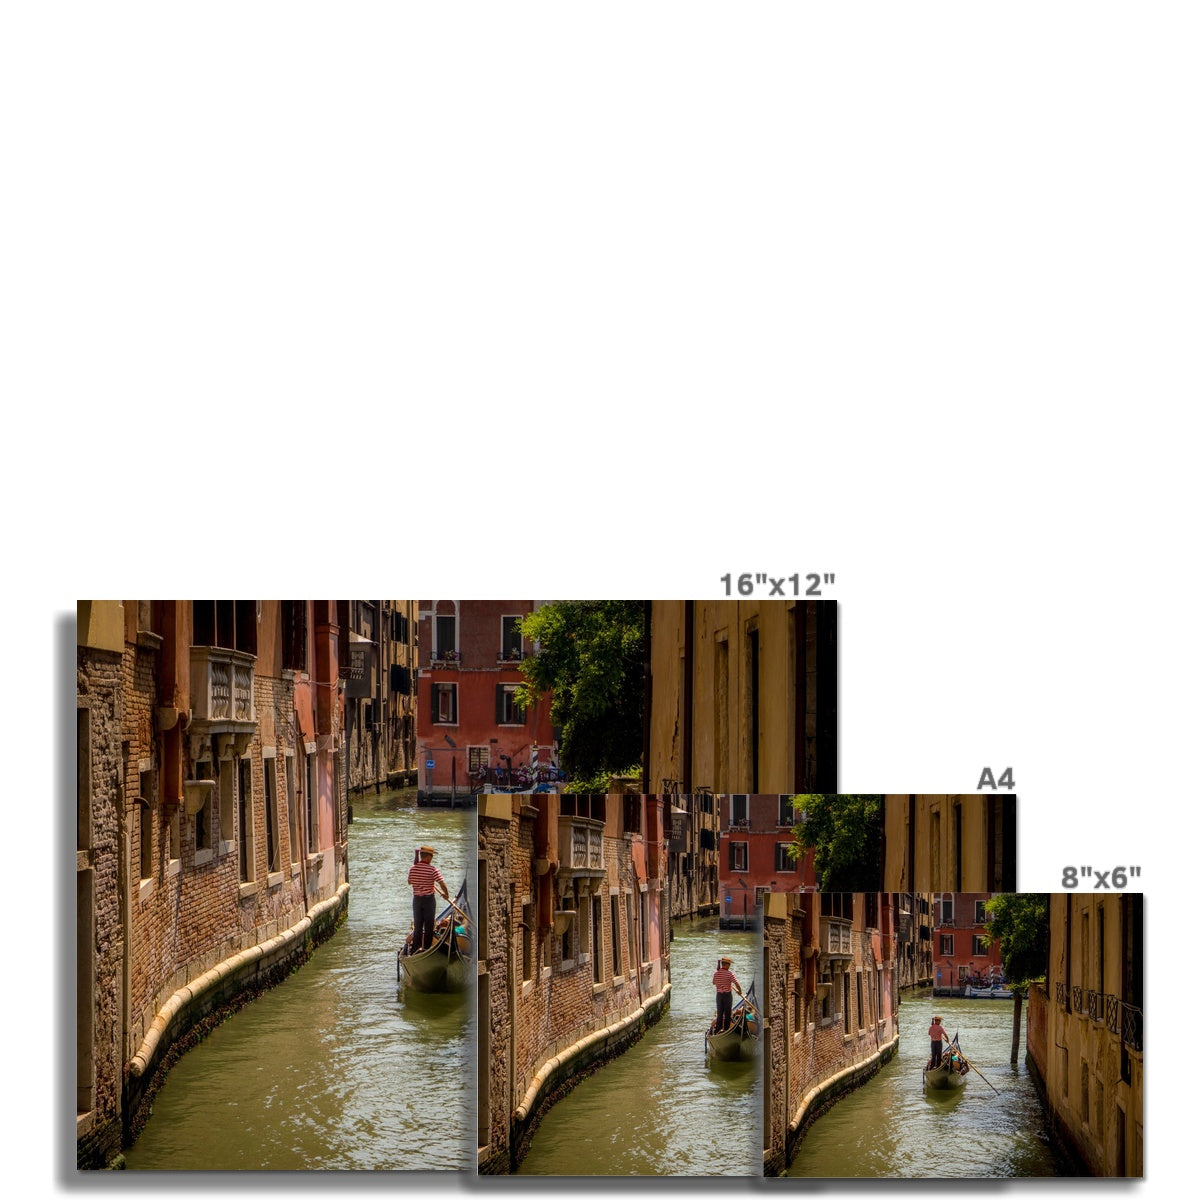 Gondola with gondolier wearing a traditional boater hat and striped top on a  canal in Venice. Italy. Fine Art Print